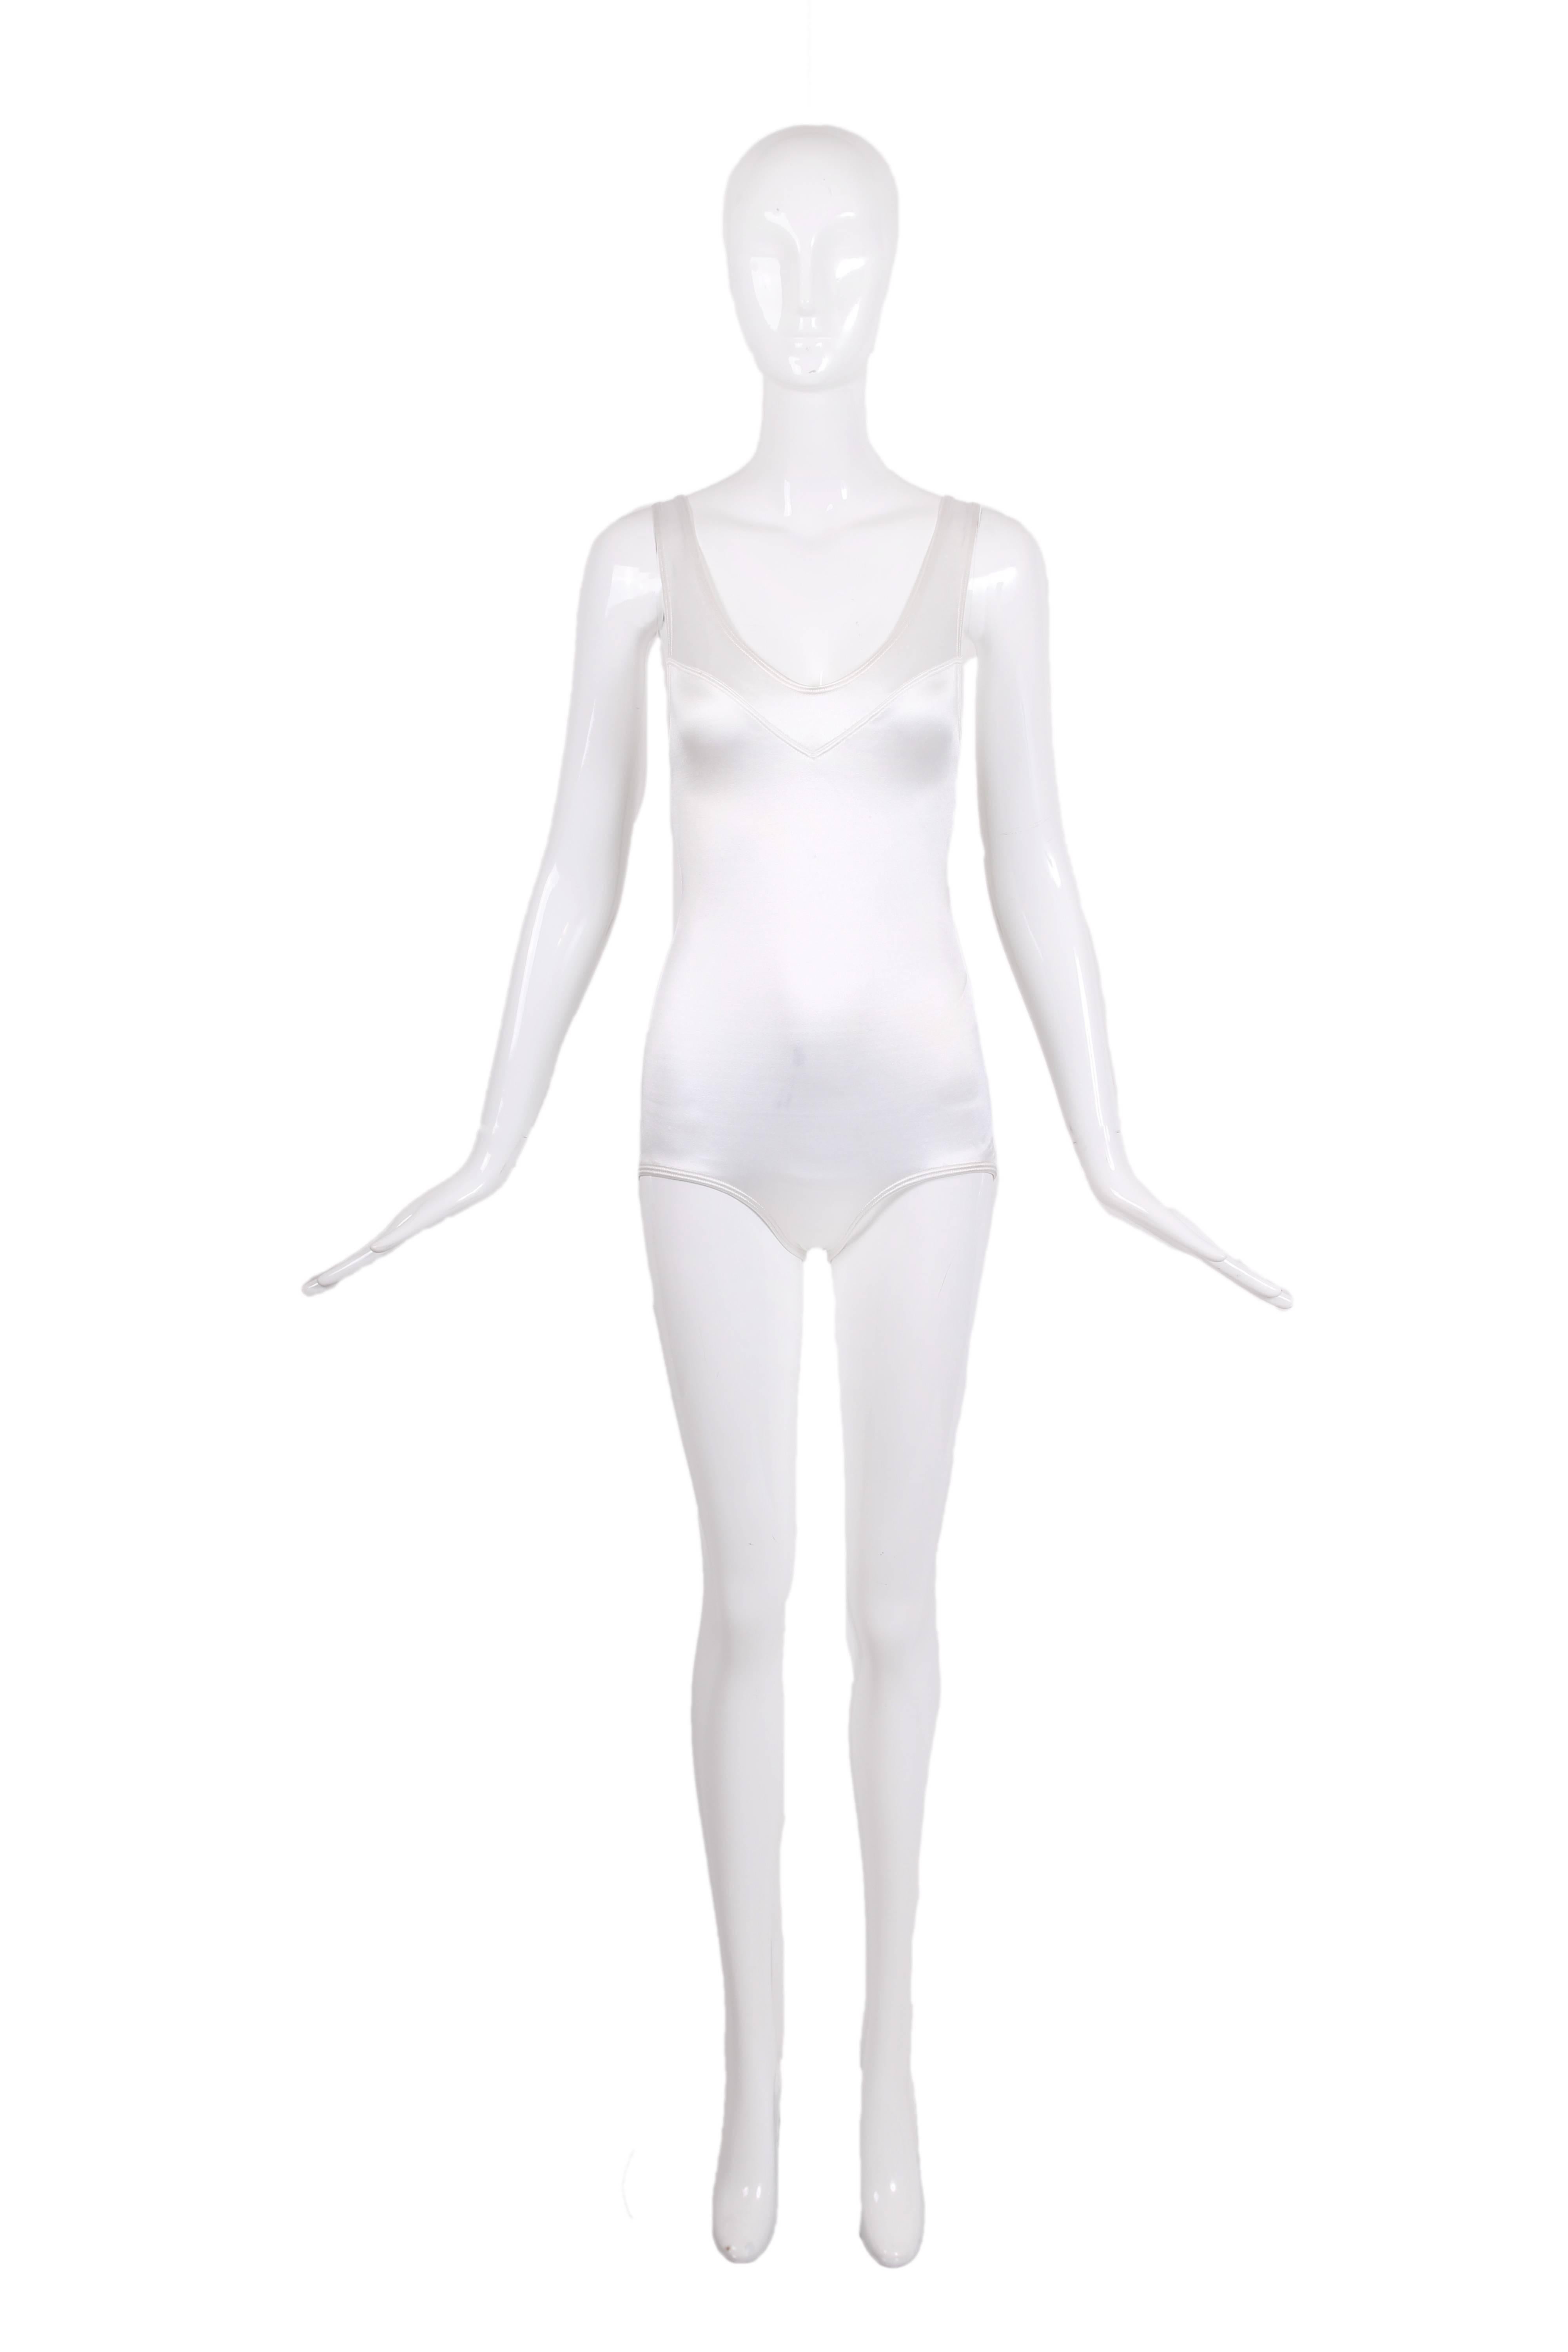 Vintage Alaia white nylon and stretch bodysuit with V-neckline and a satin sheen. In excellent condition with very light marks at interior near arm hole. Size XS with a lot of stretch.
MEASUREMENTS:
Length - 27